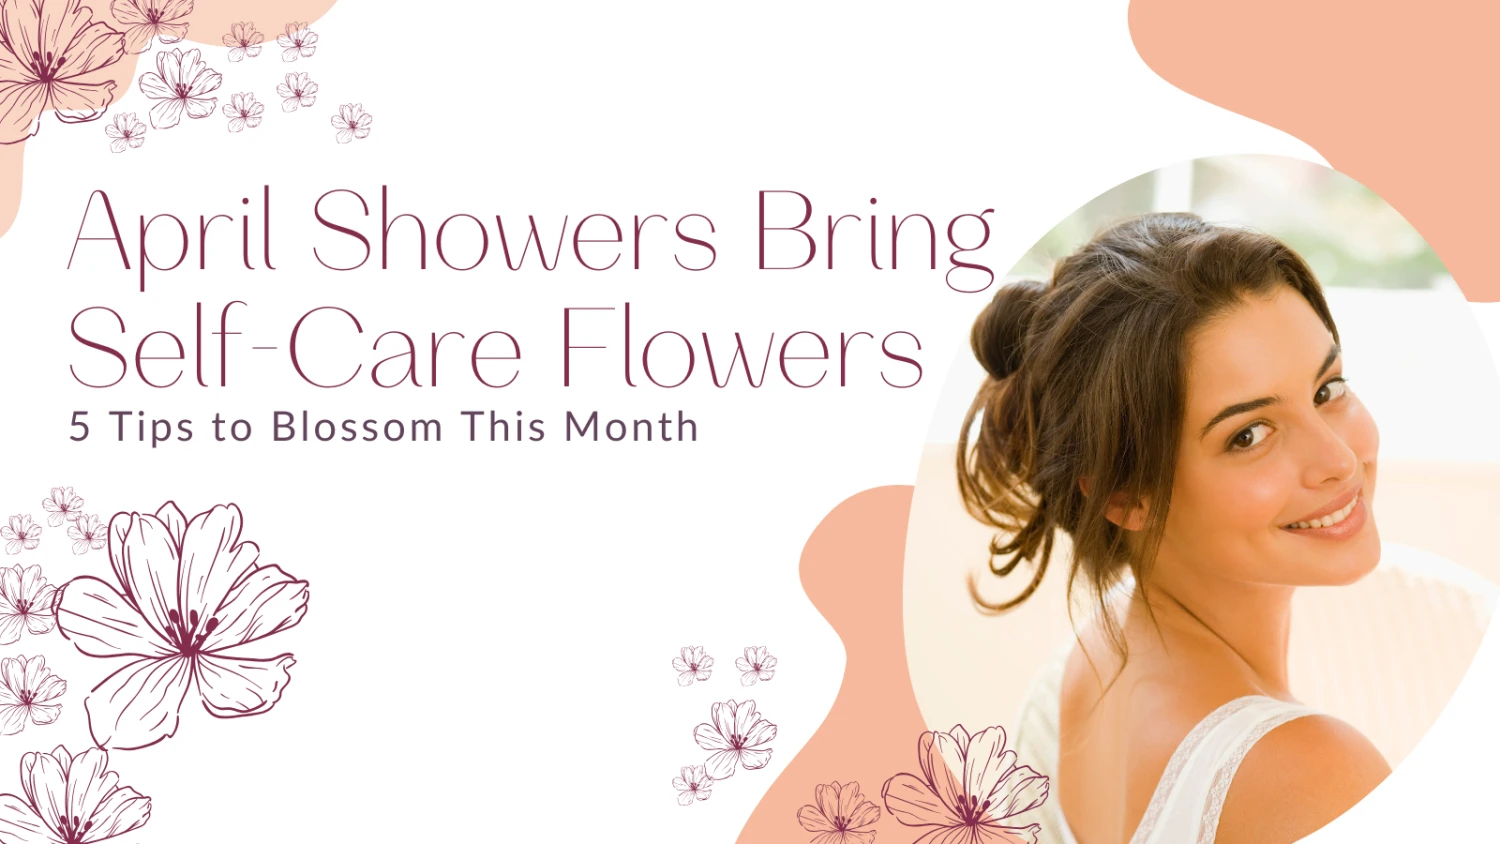 April Showers Bring Self-Care Flowers: 5 Tips to Blossom This Month